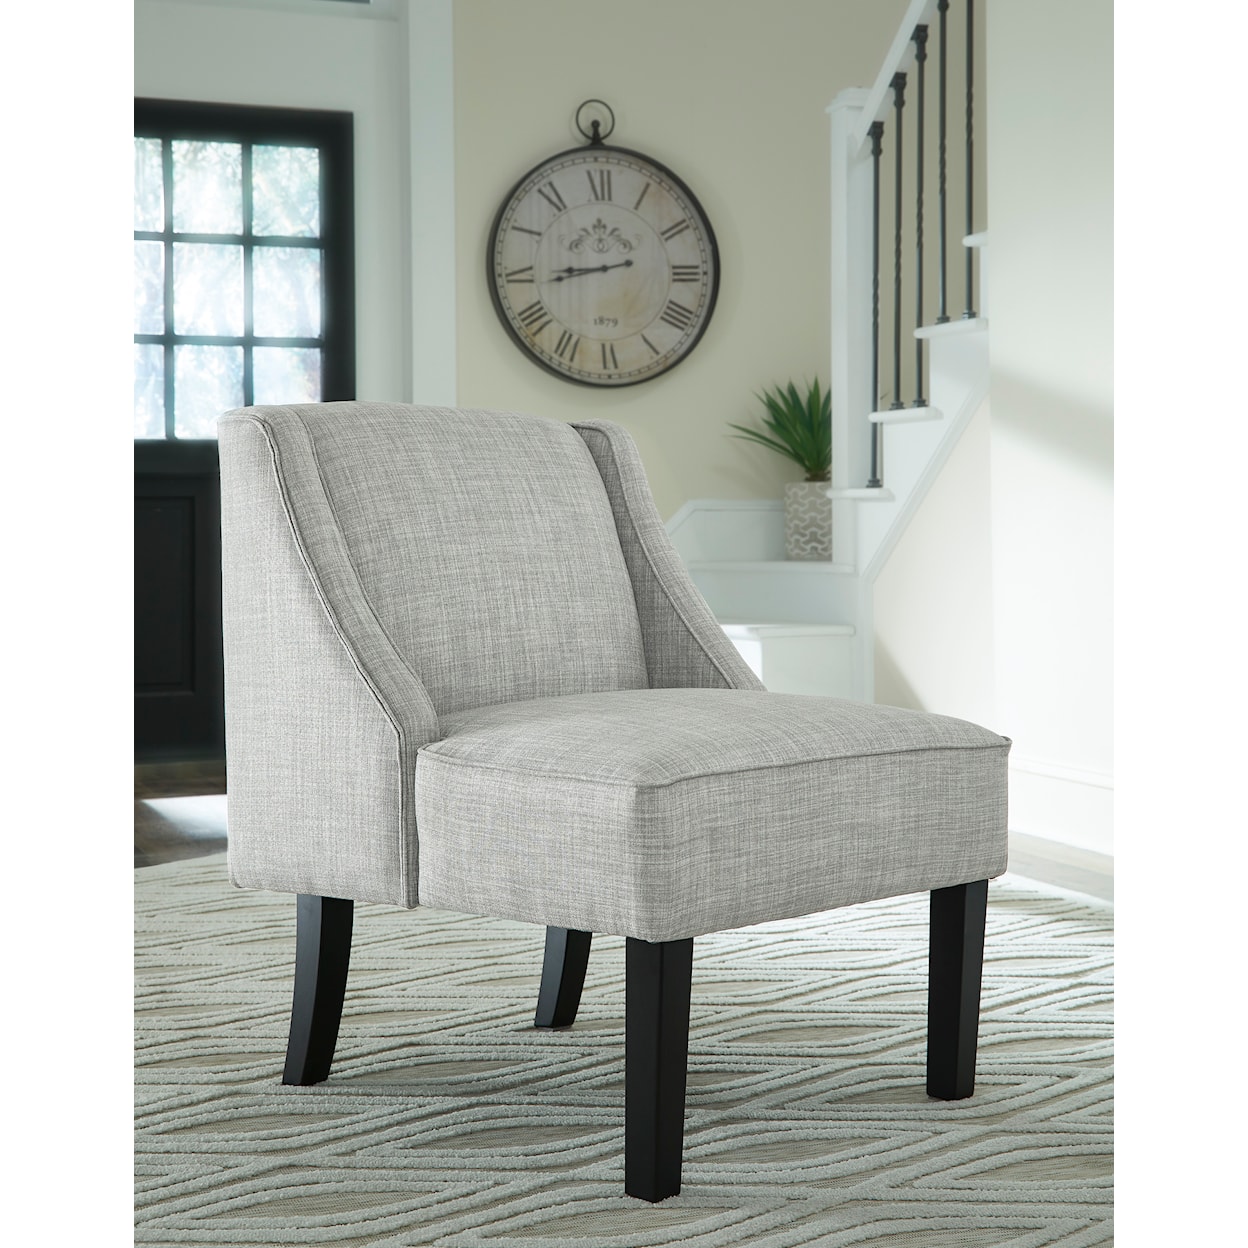 Signature Design by Ashley Janesley Accent Chair